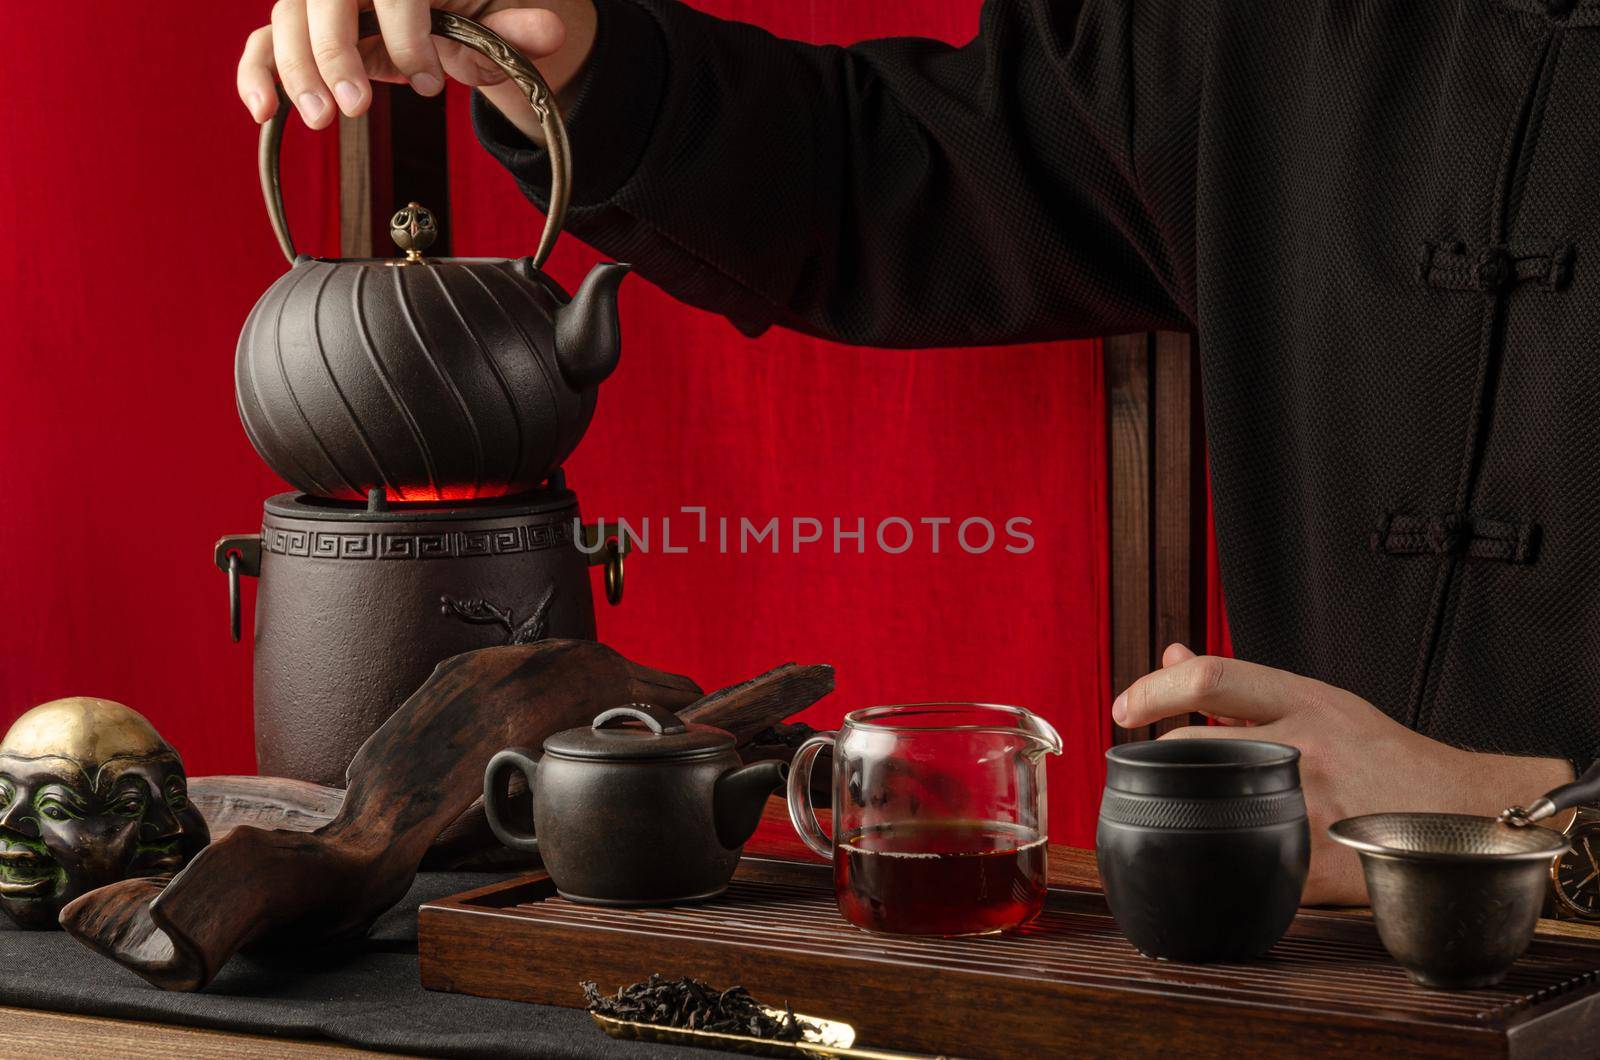 the tea table with instruments teapots cups pancake and tea Shen Puer